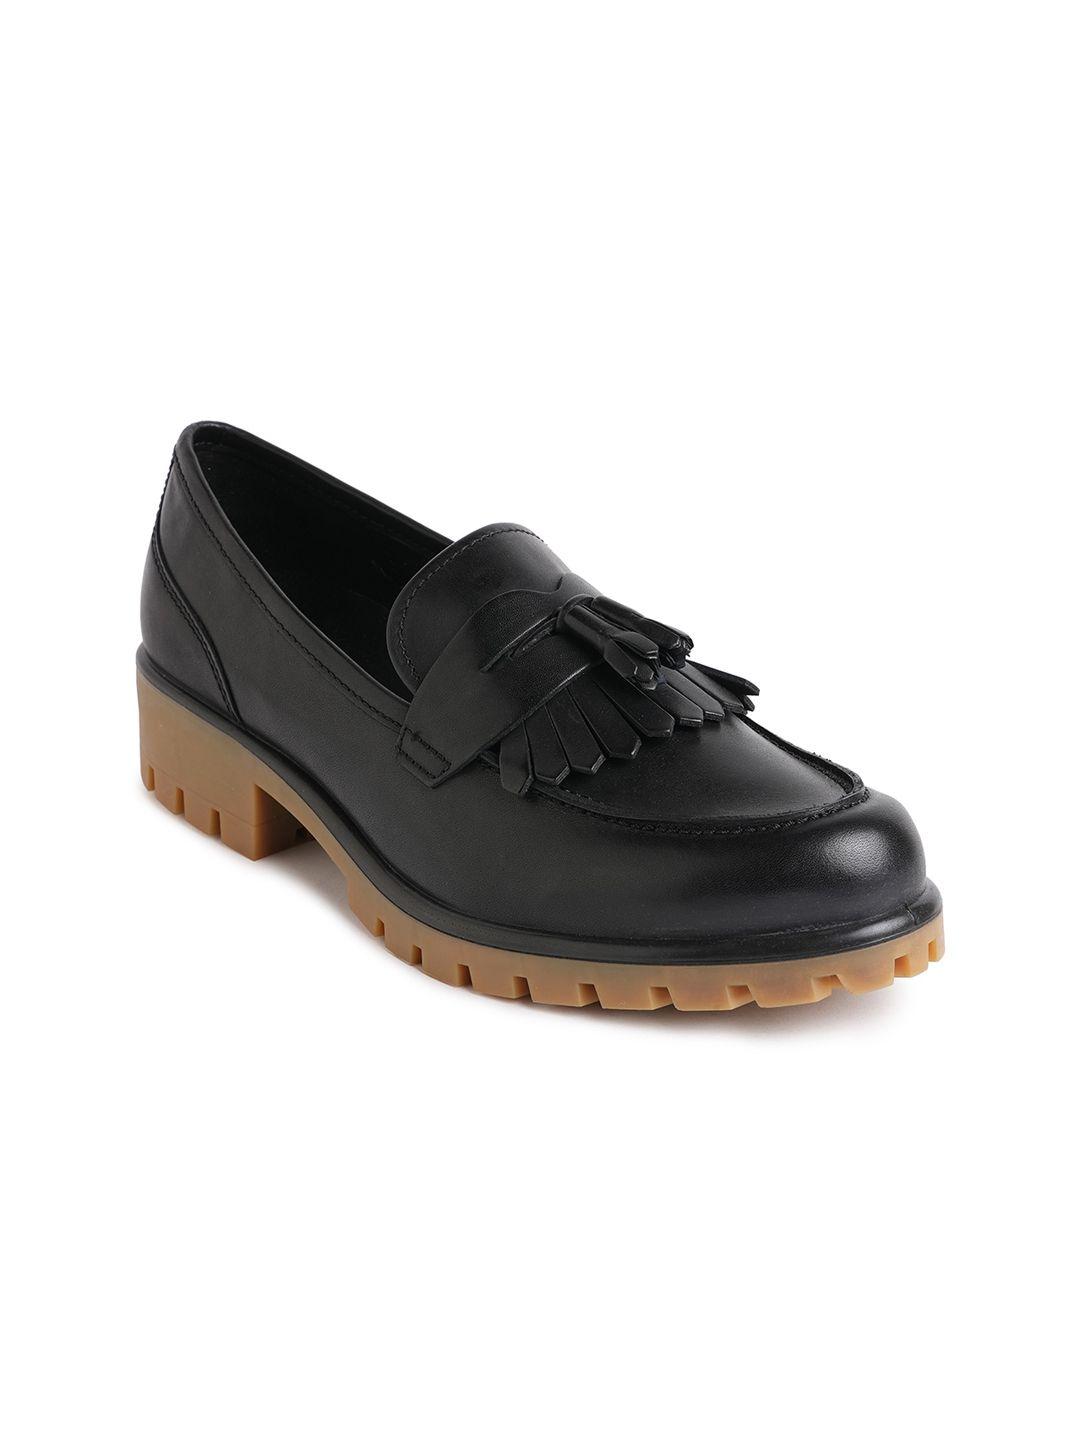 ecco women modtray leather comfort insole tassel loafers